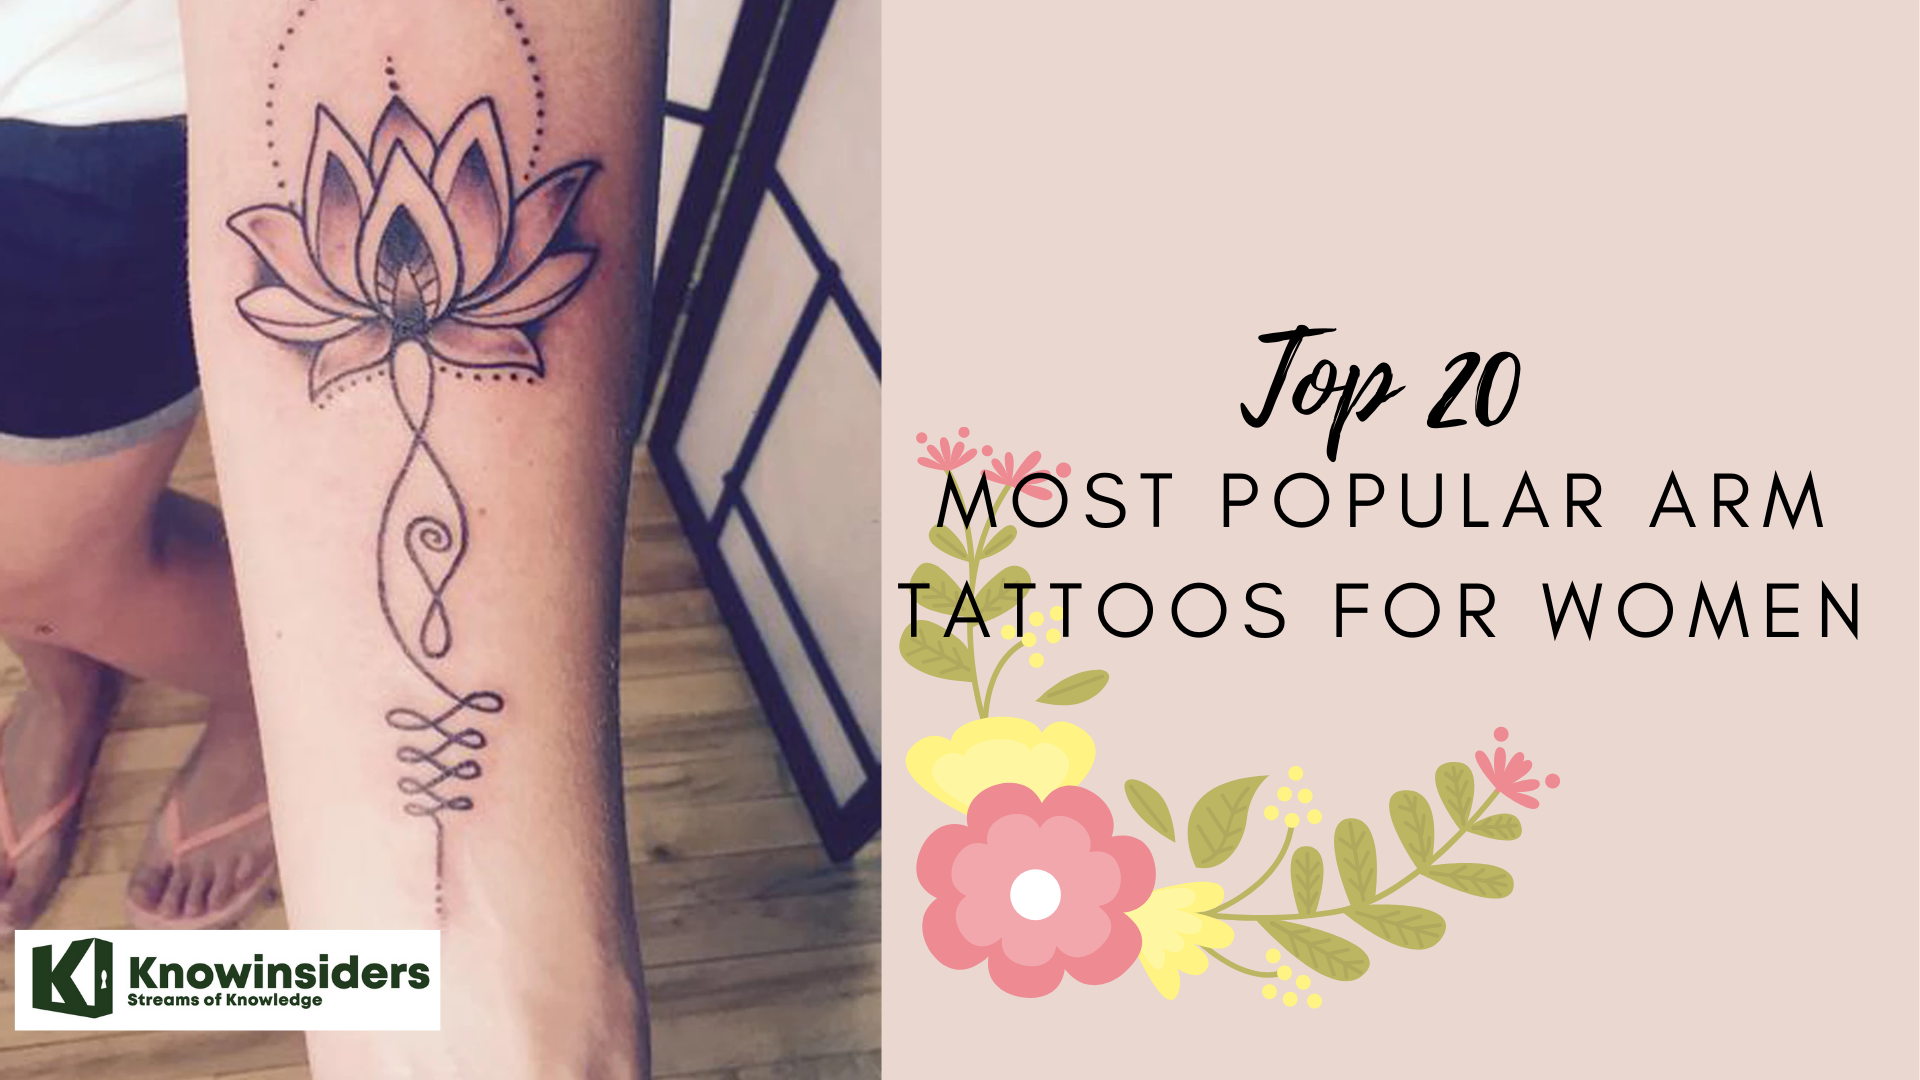 Top 20 Most Popular and Beautiful Arm Tattoos for Women/Girls | KnowInsiders